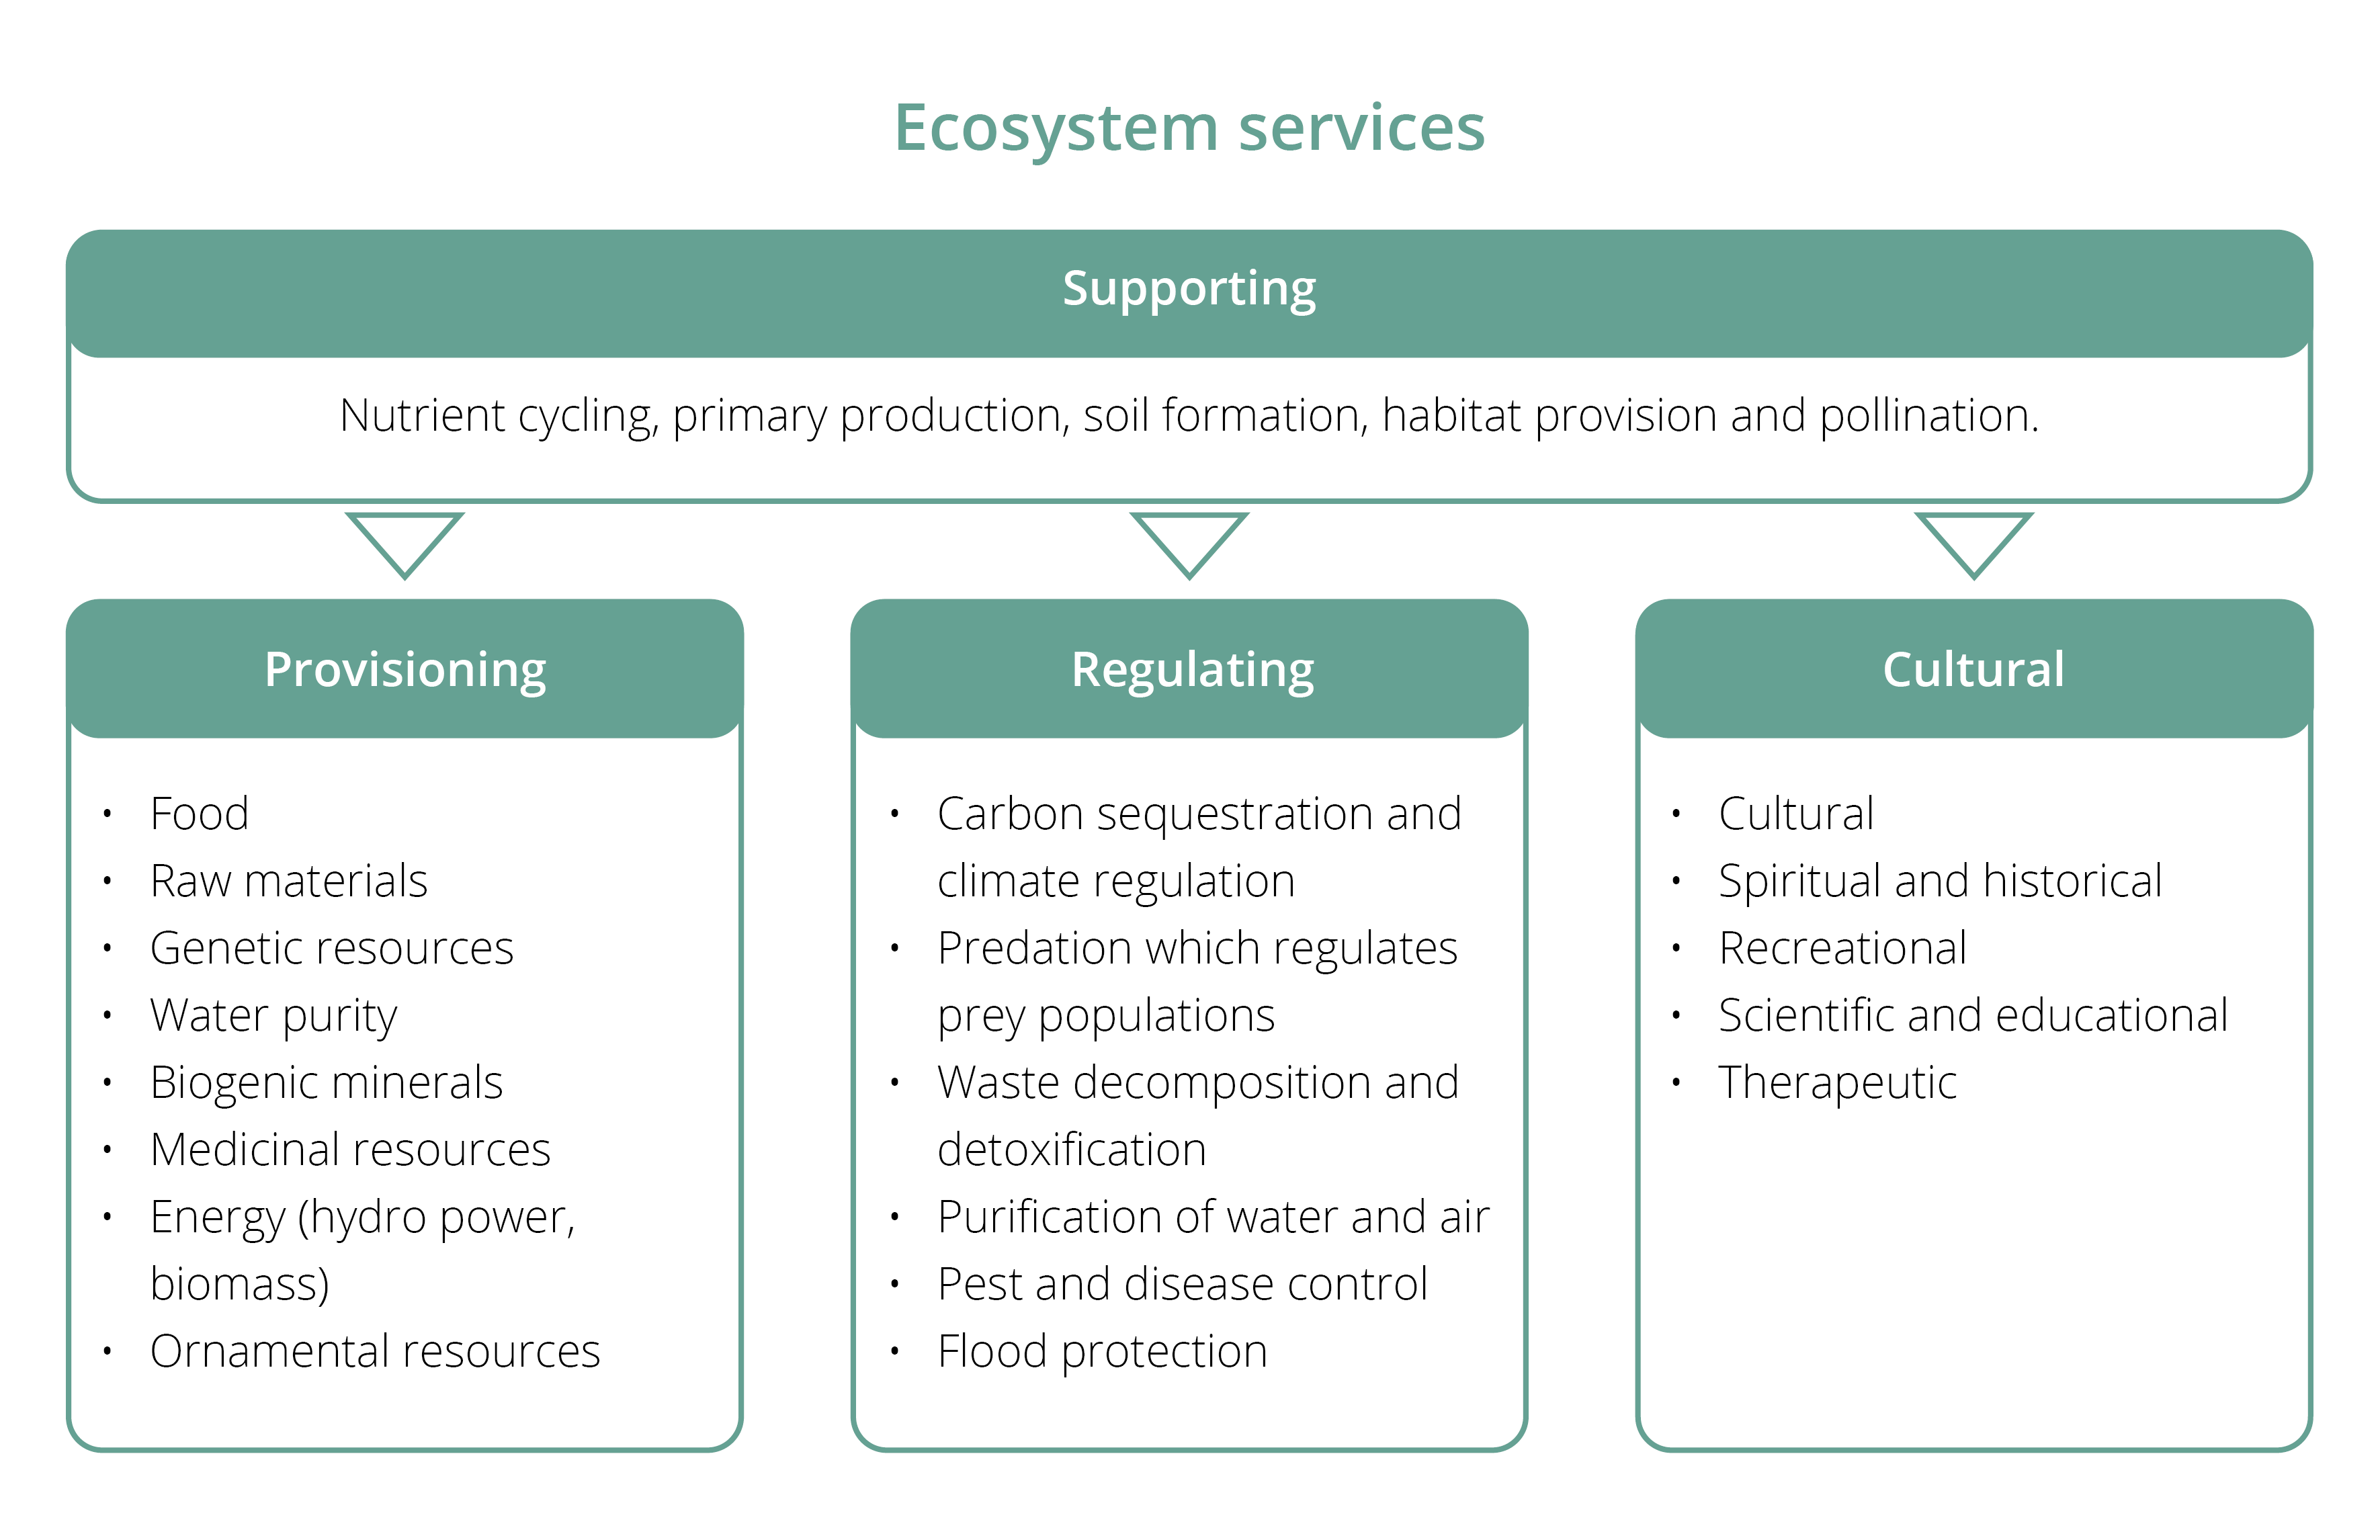 Ecosystem services in four categories